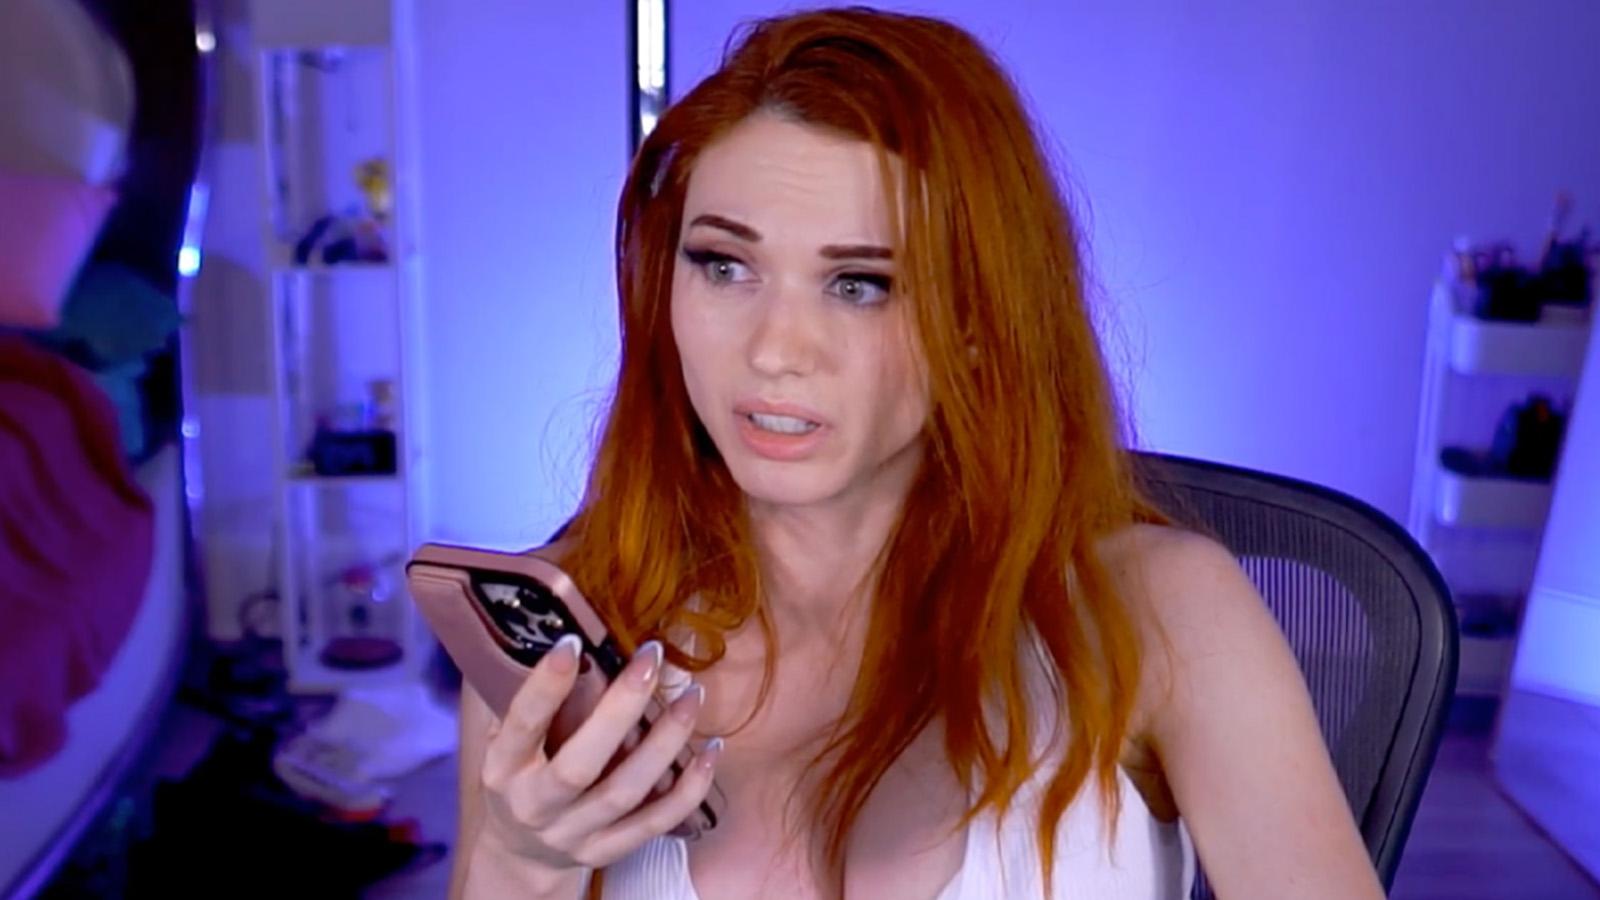 Amouranth speaking into phone on stream